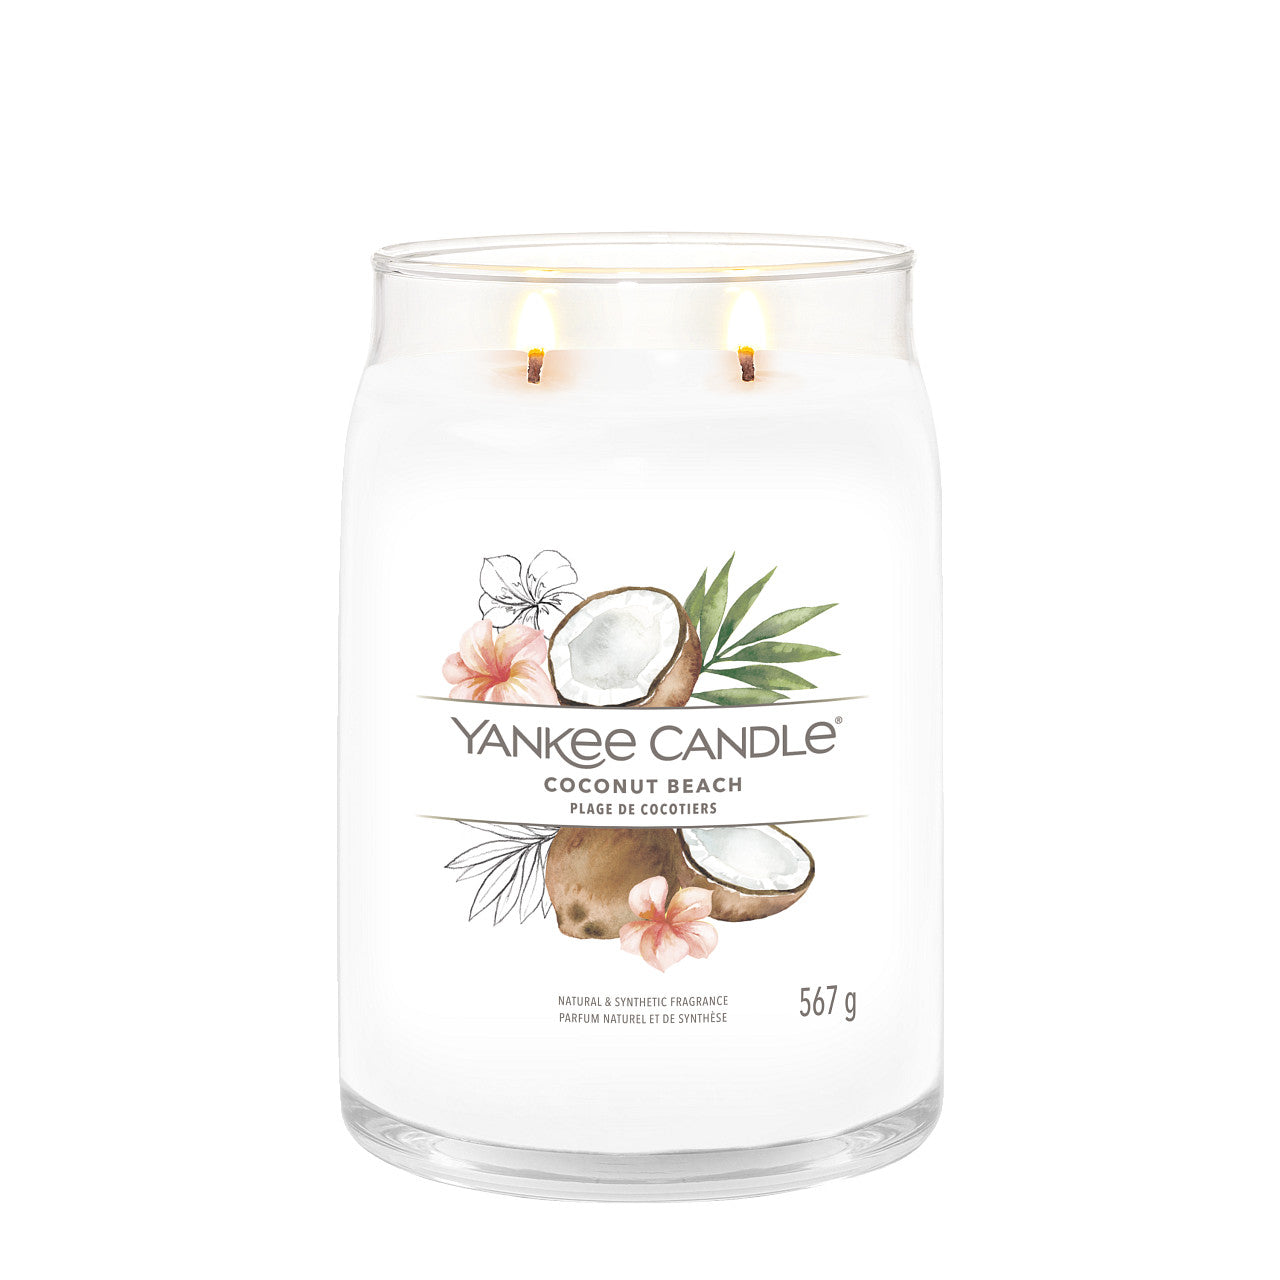 Coconut Beach - Signature Large Jar Scented Candle